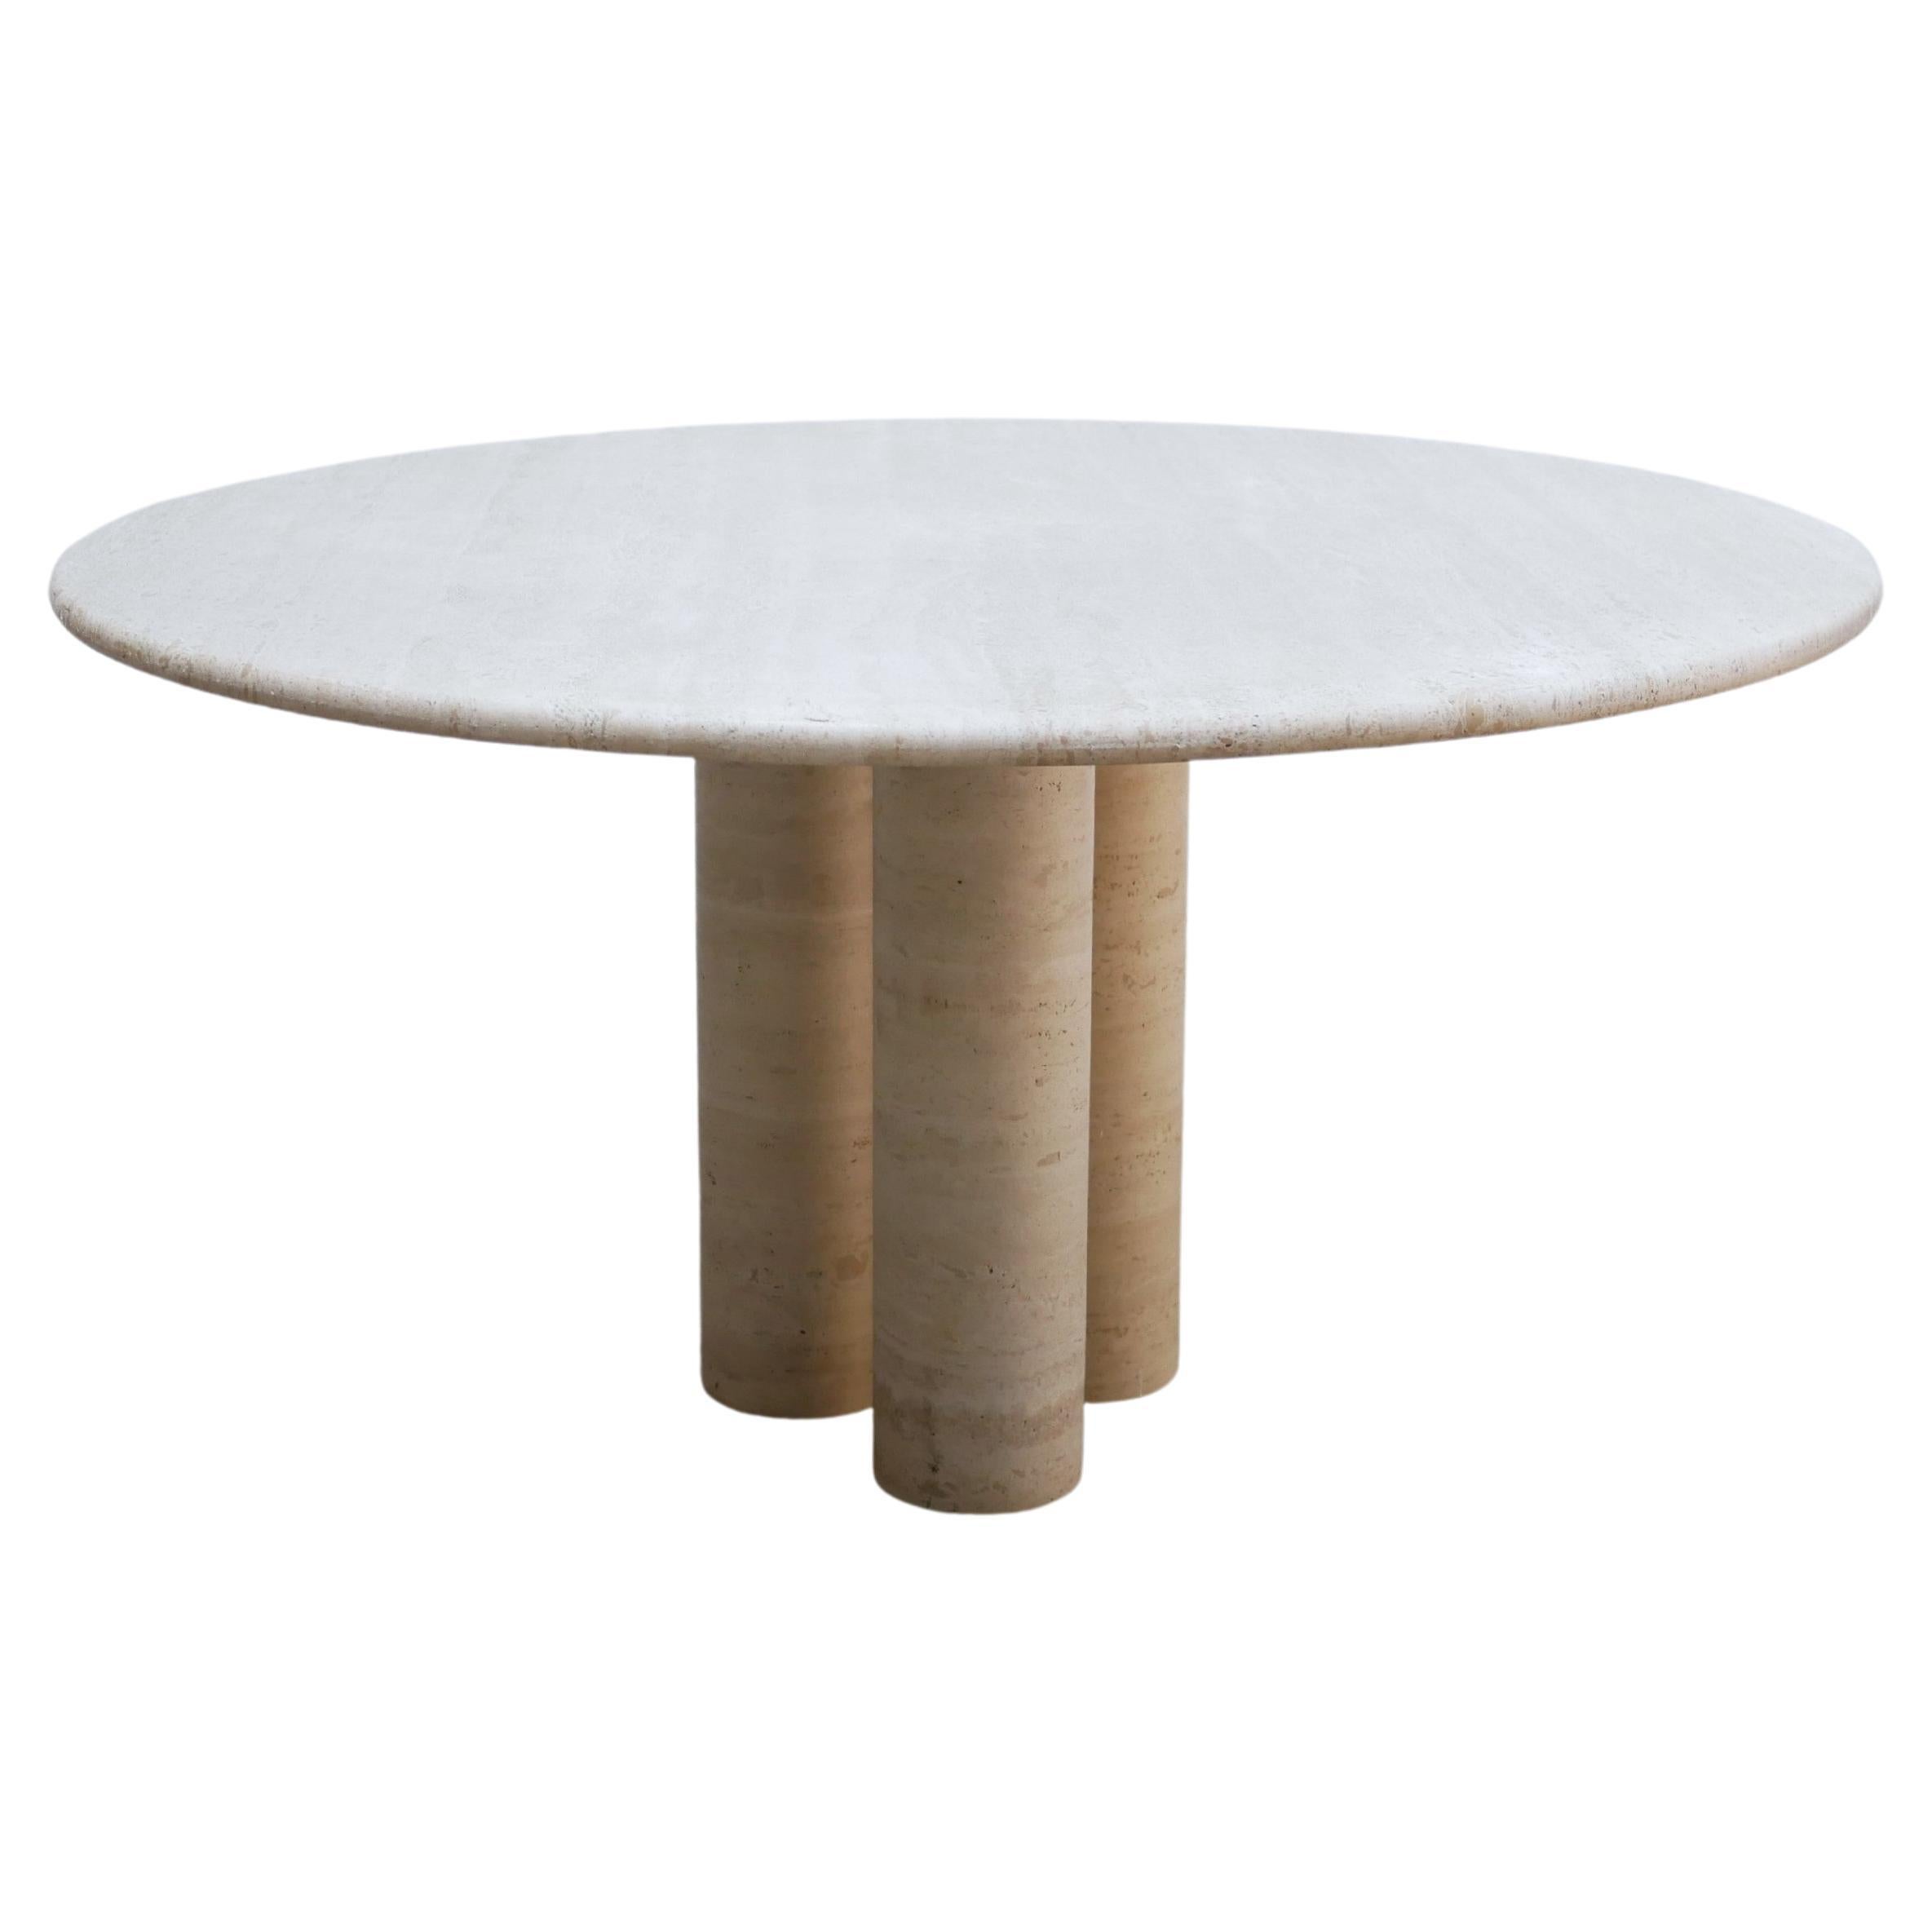 Vintage Travertine Dining Table For Sale